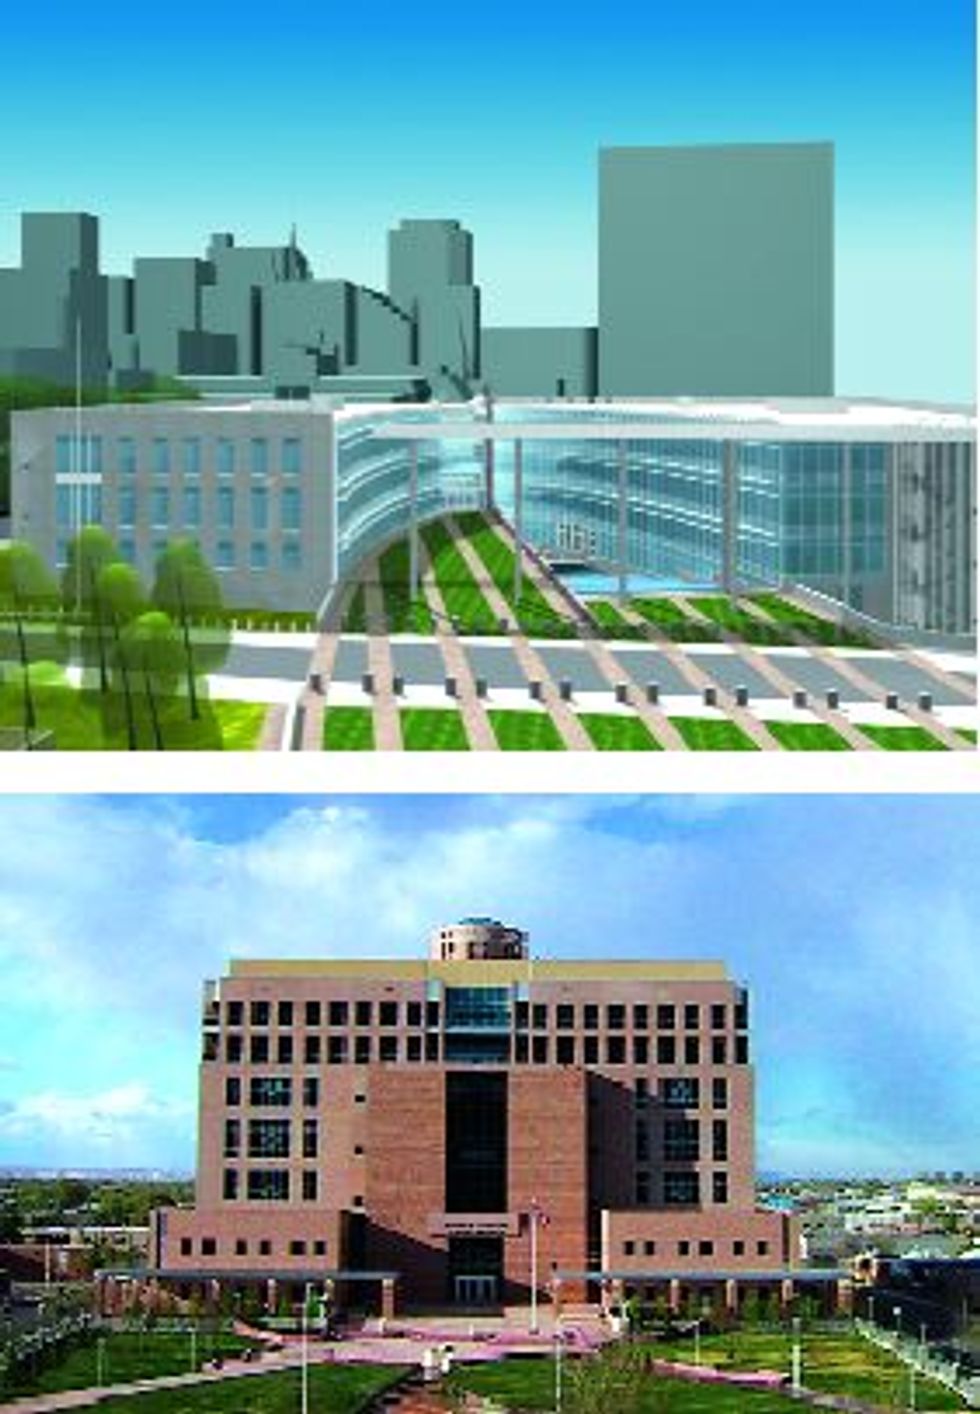 proposed replacement for the Murrah federal building in Oklahoma City